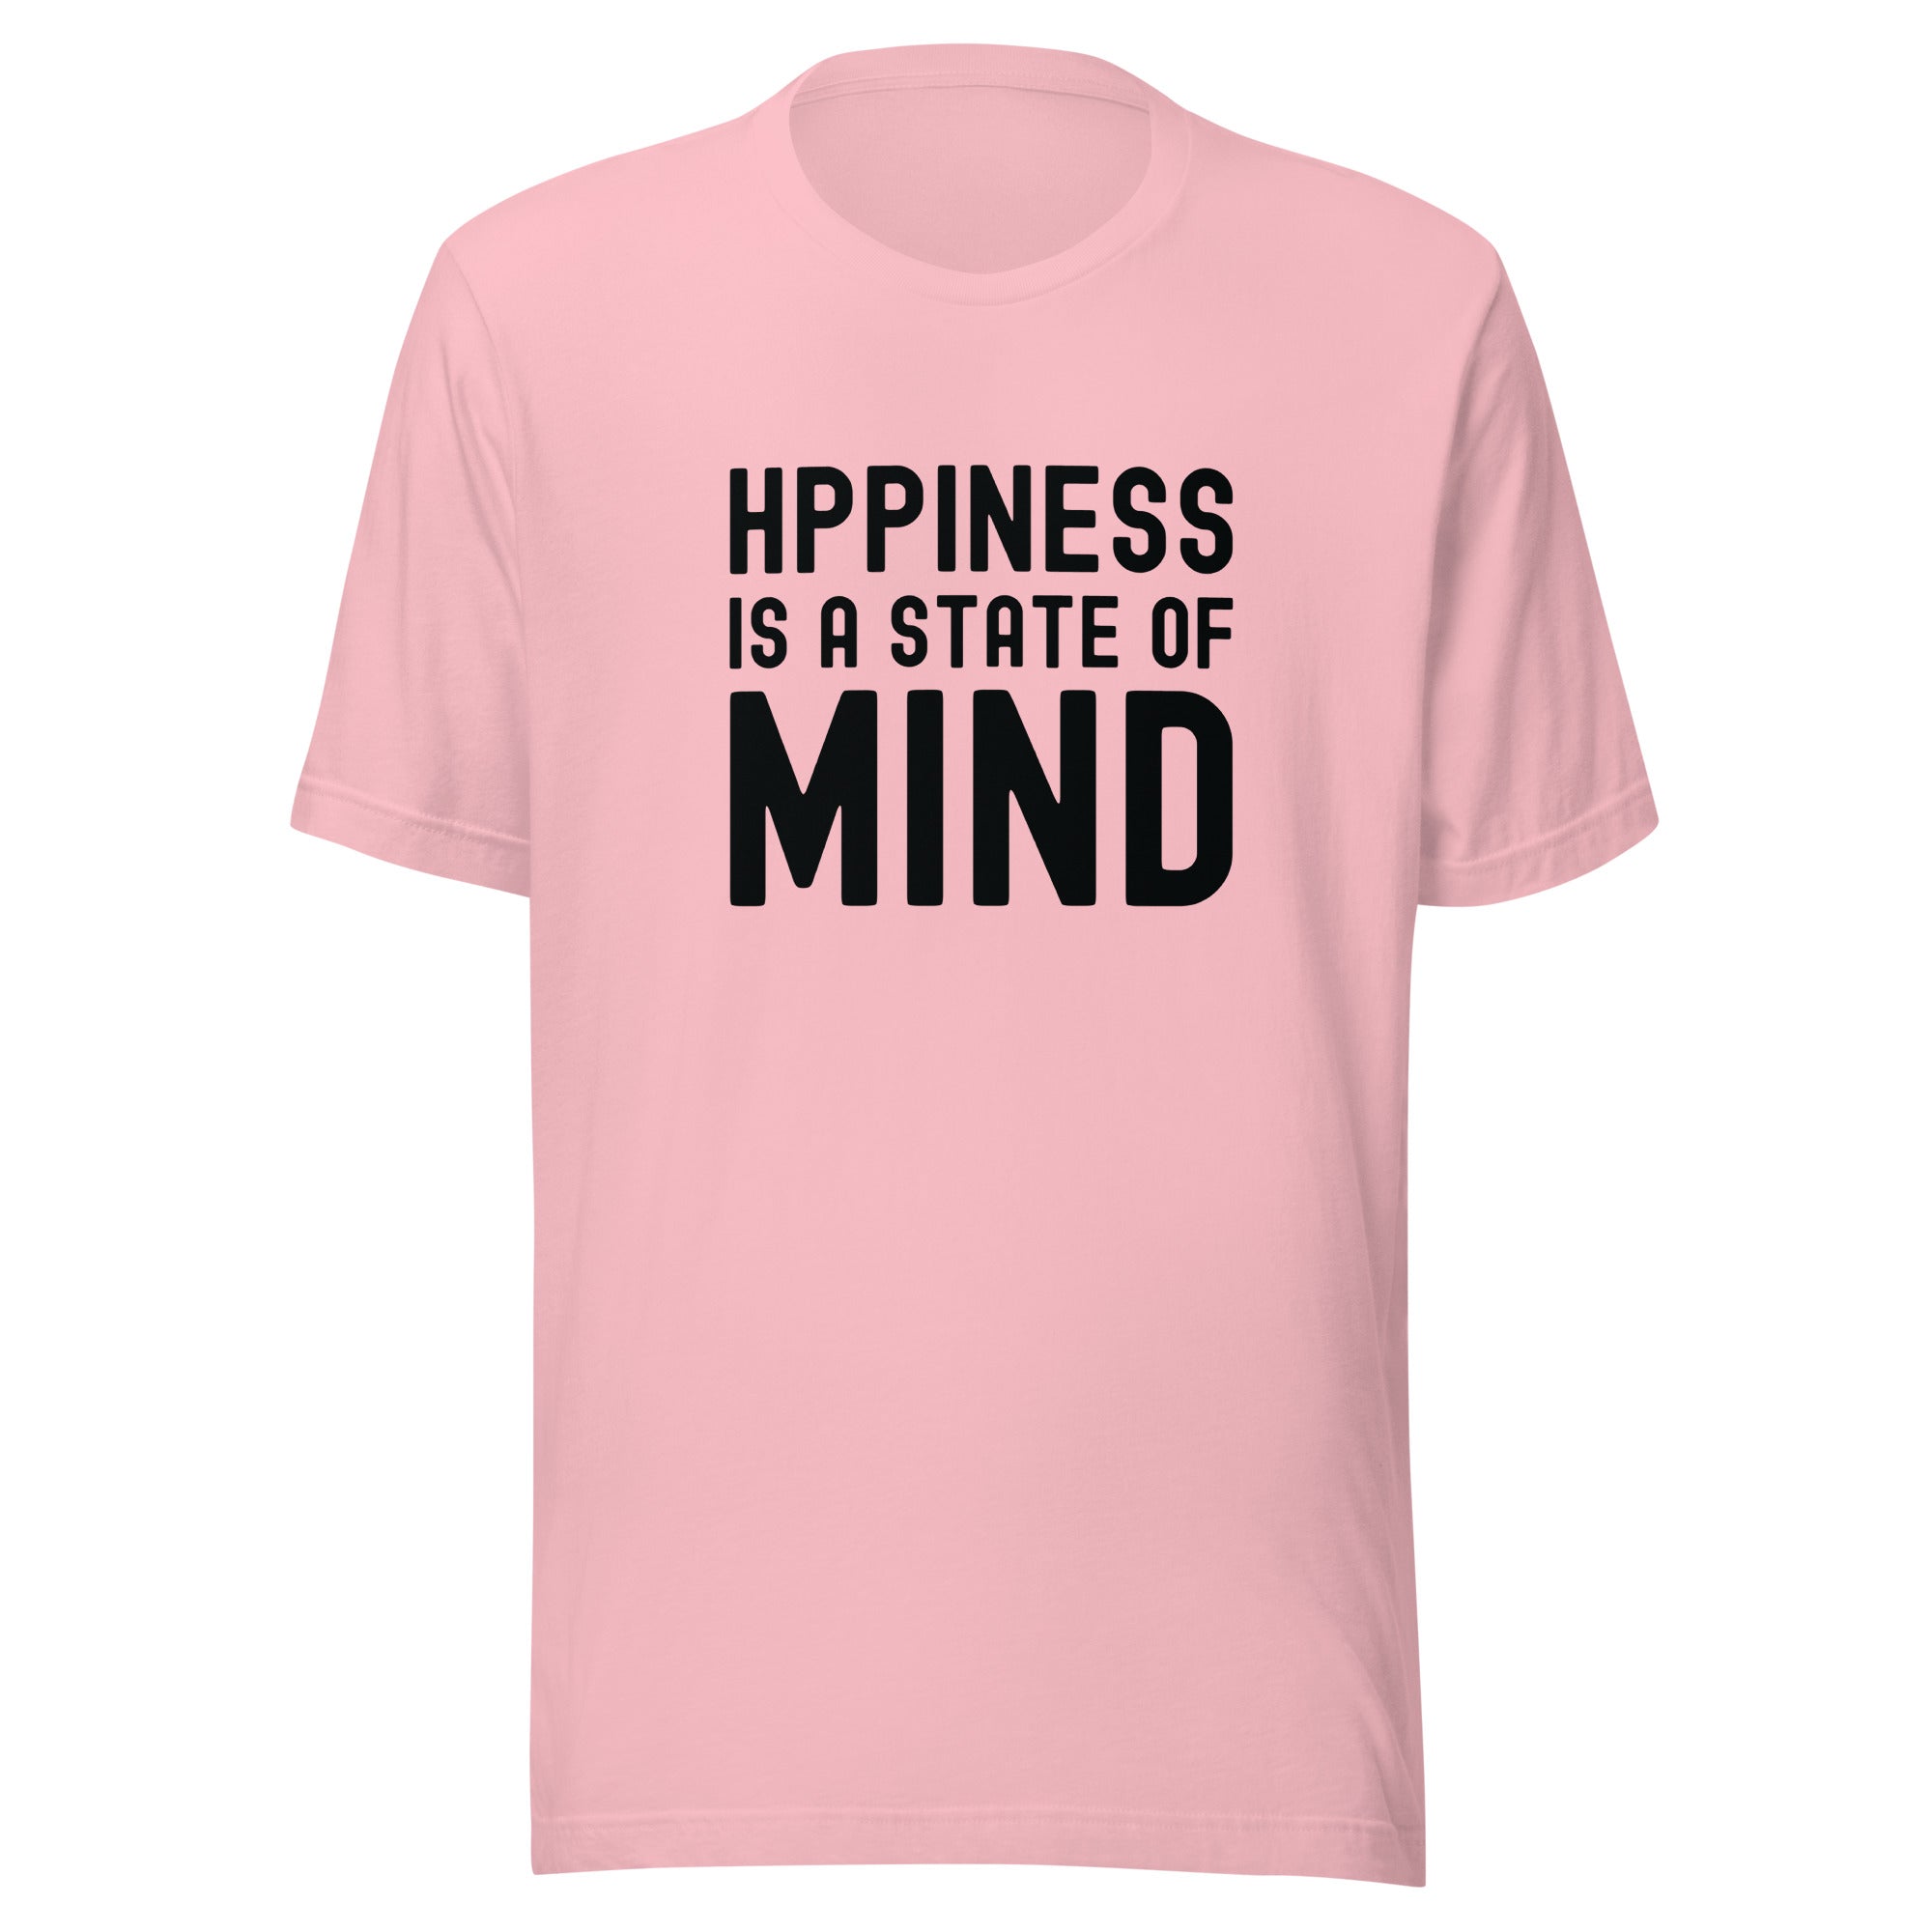 Unisex t-shirt | Hppiness is a state of mind